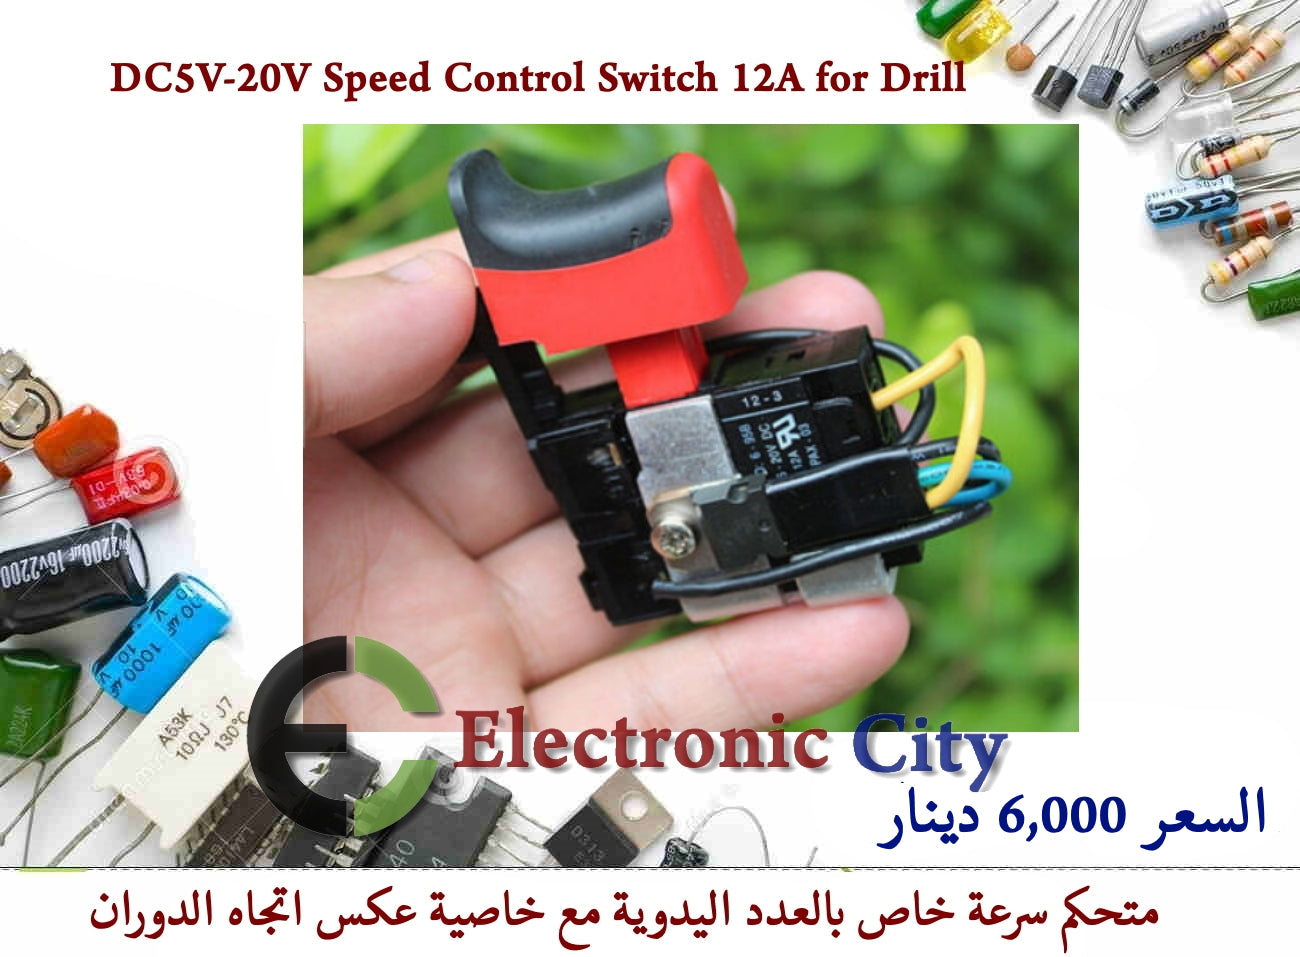 DC5V-20V Speed Control Switch 12A for Drill